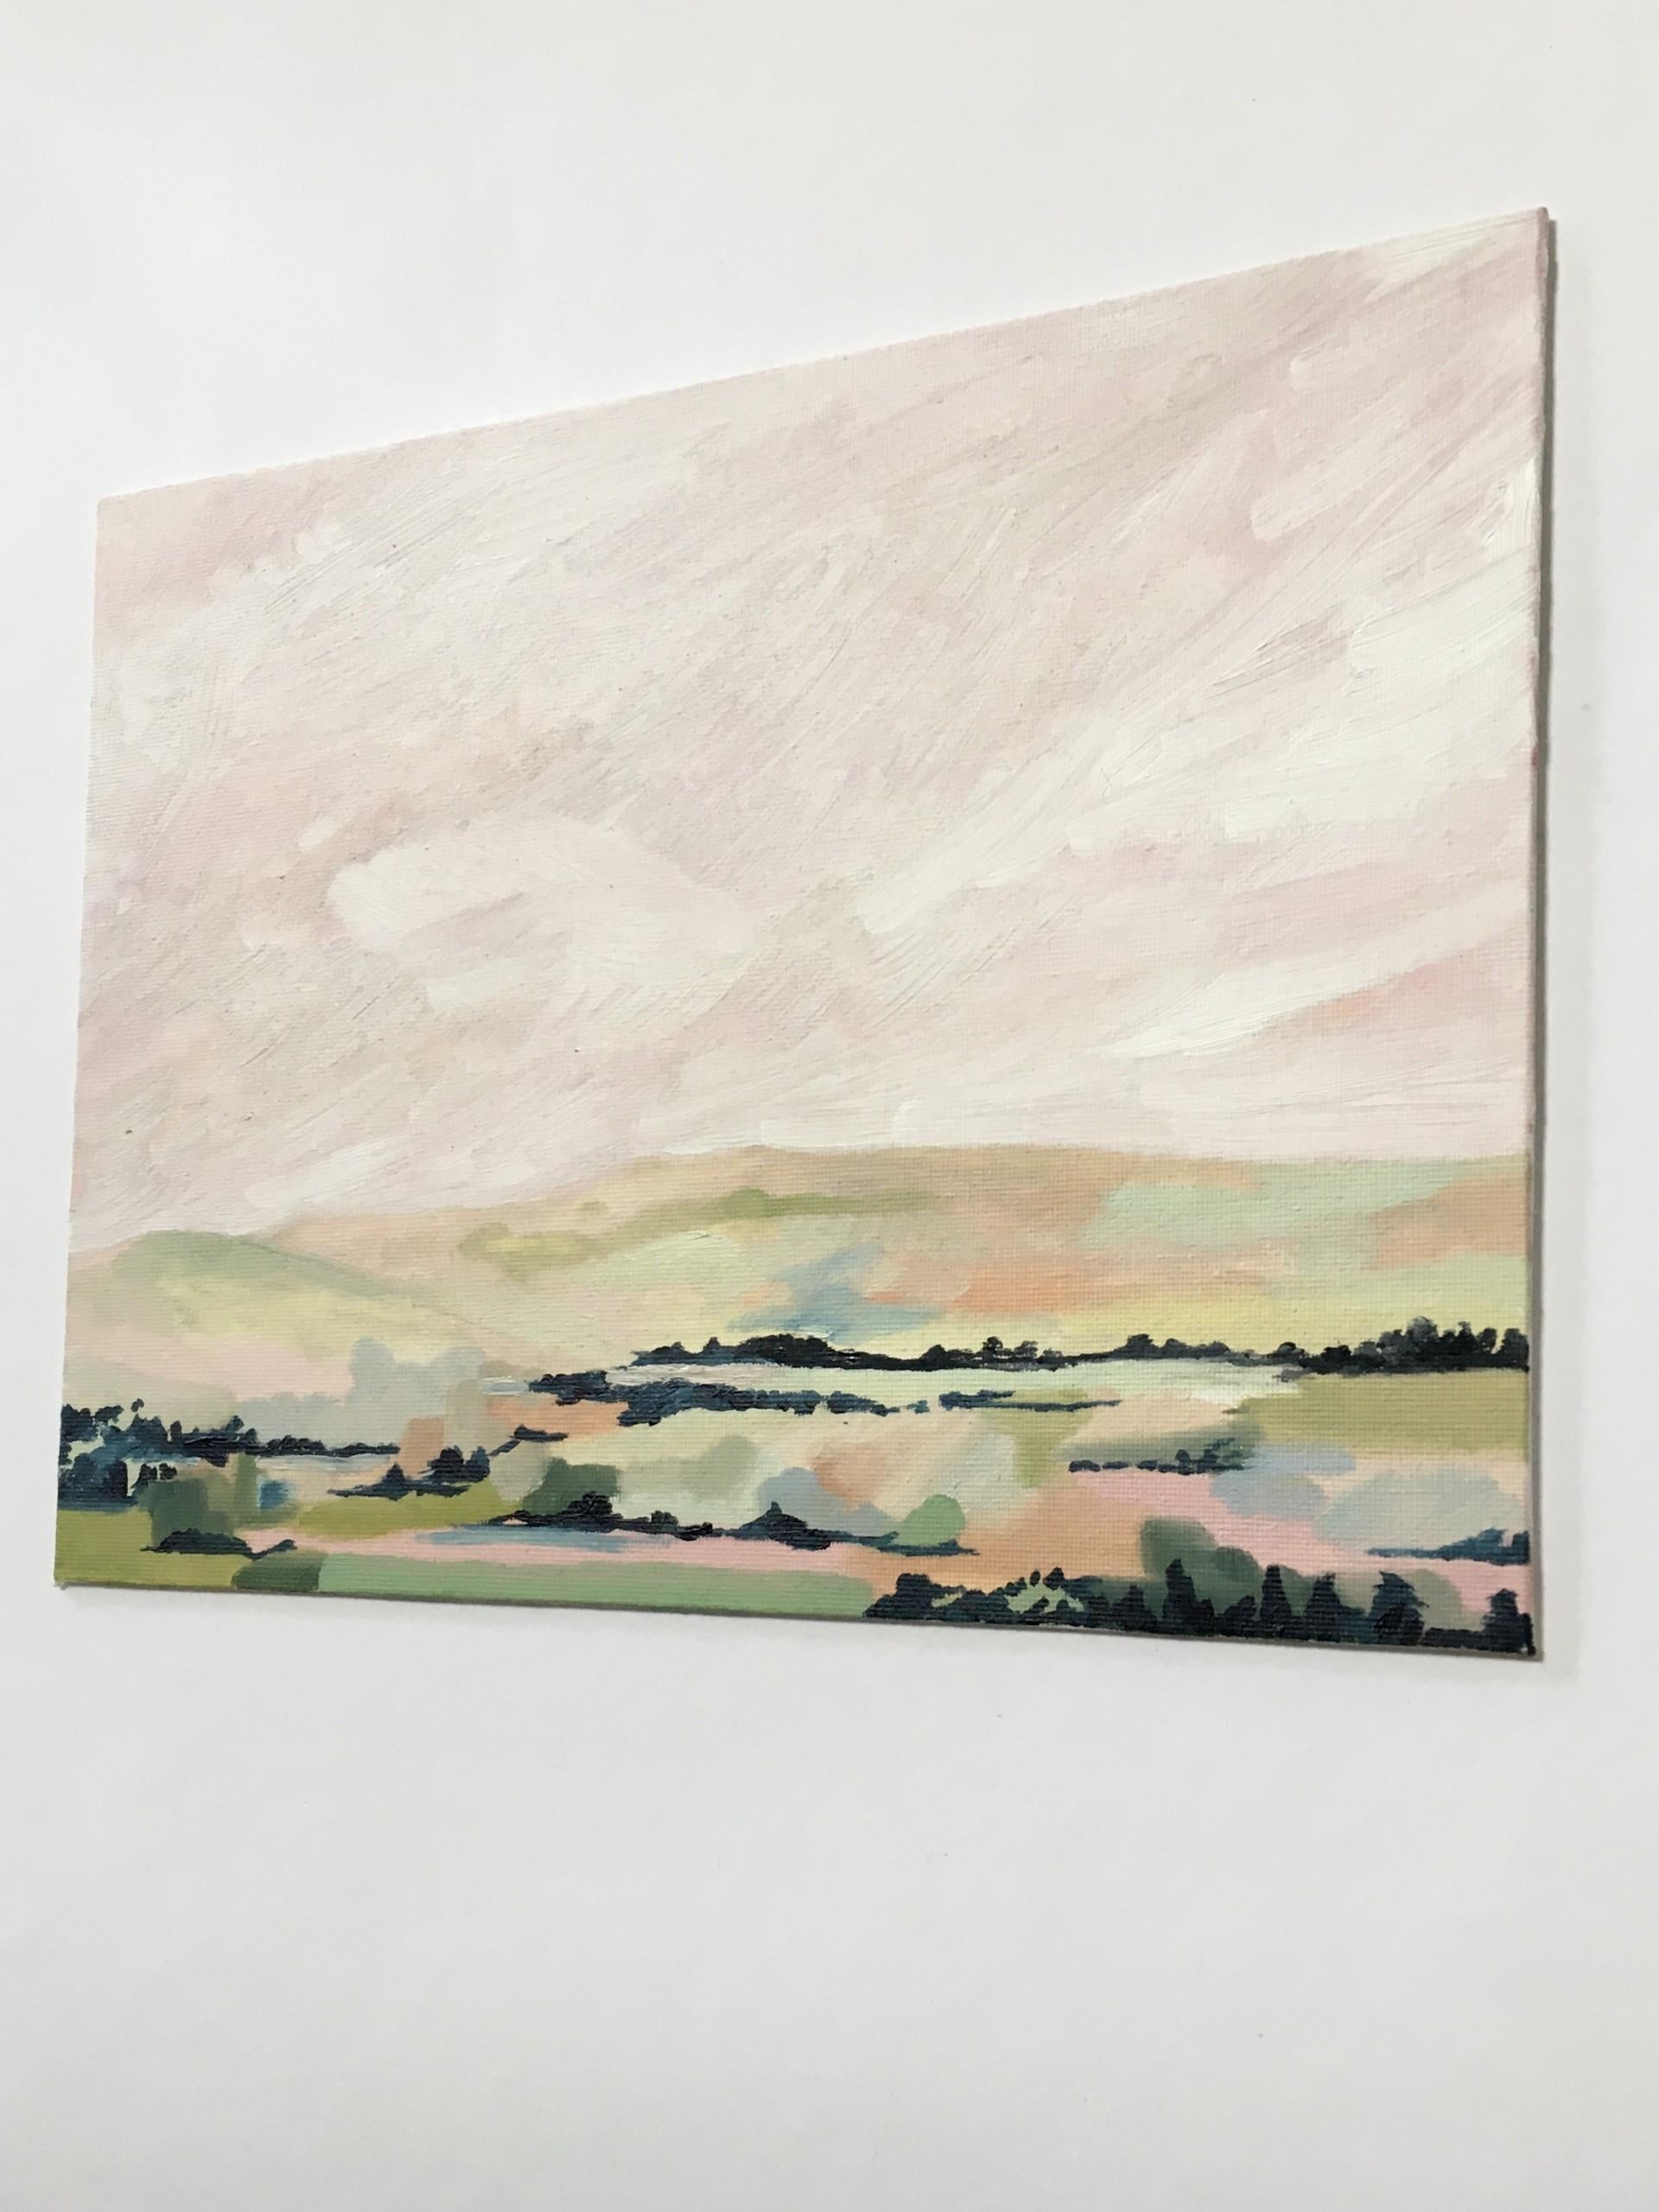 Soft Light Over Dartmoor by Sophie Berger [2022]

An original oil painting in calm muted colours. Built up in layers, this painting started as a sketch on Dartmoor. When looking closely the viewer can see the variety of bold brush strokes that have